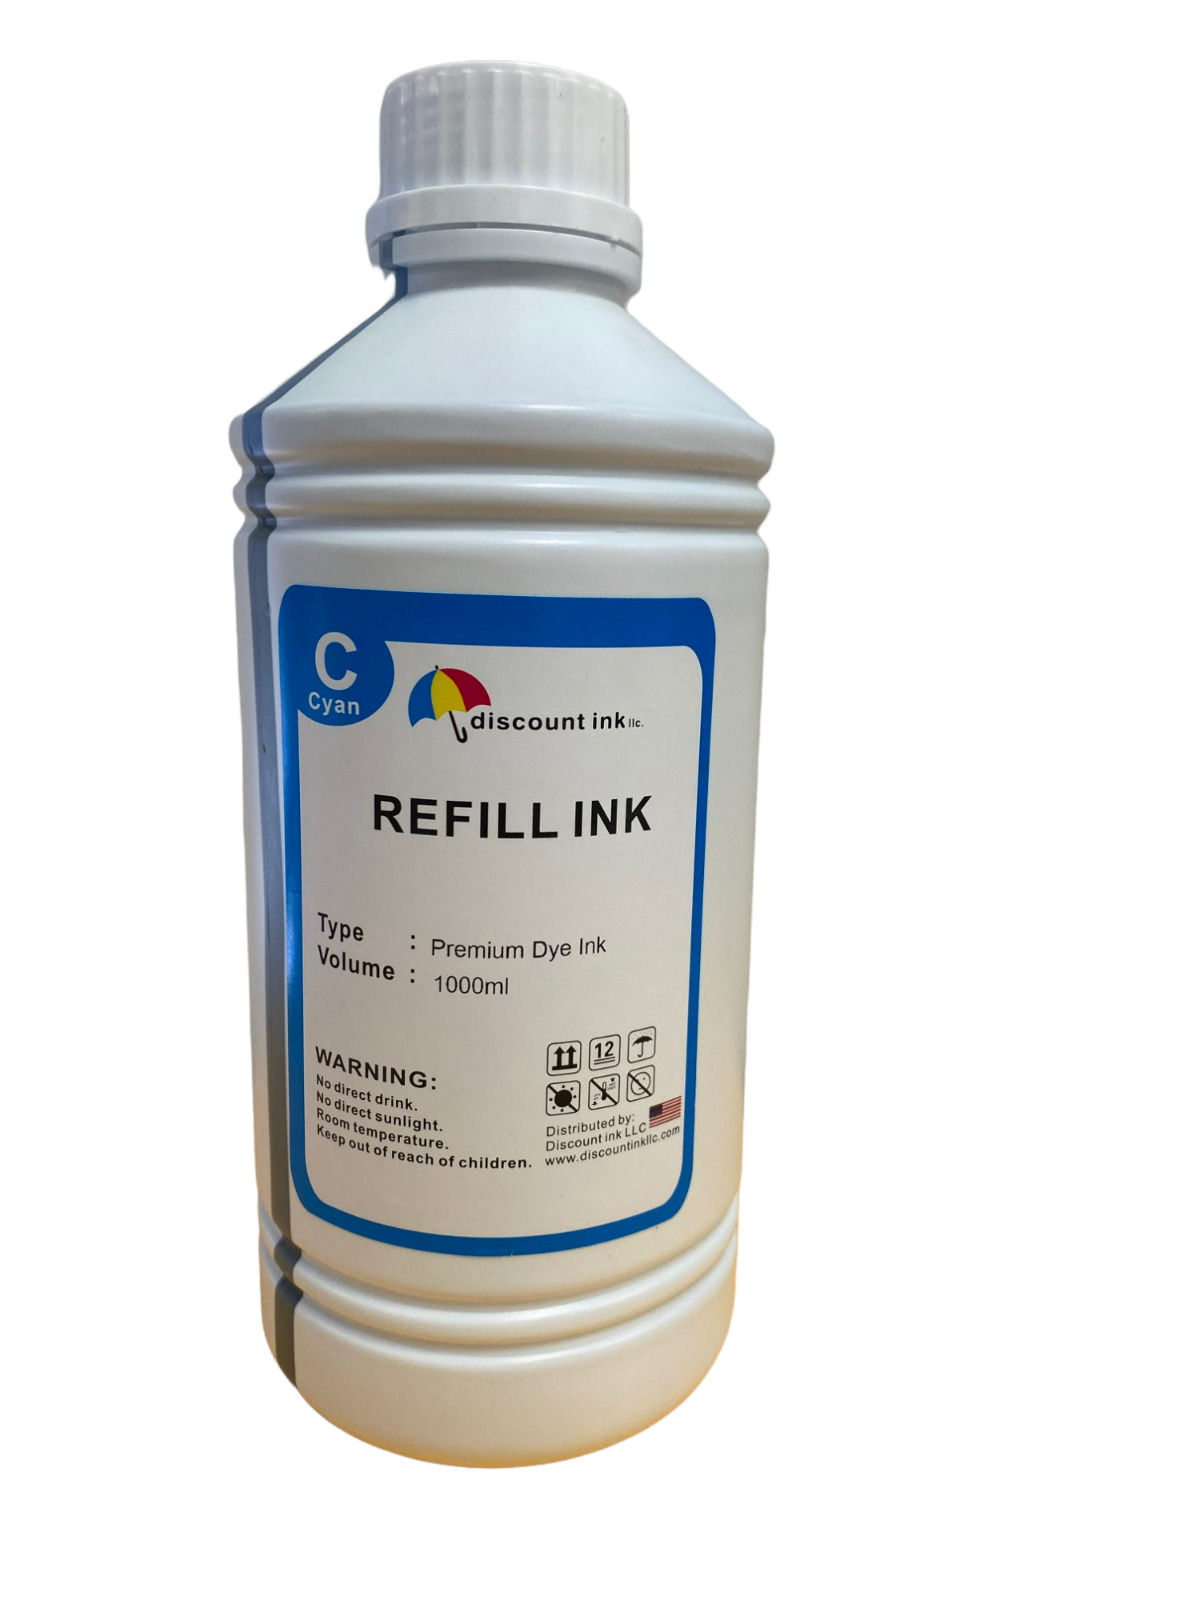 Liter-1000ml Cyan Bulk Refill Ink for all HP, Epson, Brother, Canon Printers